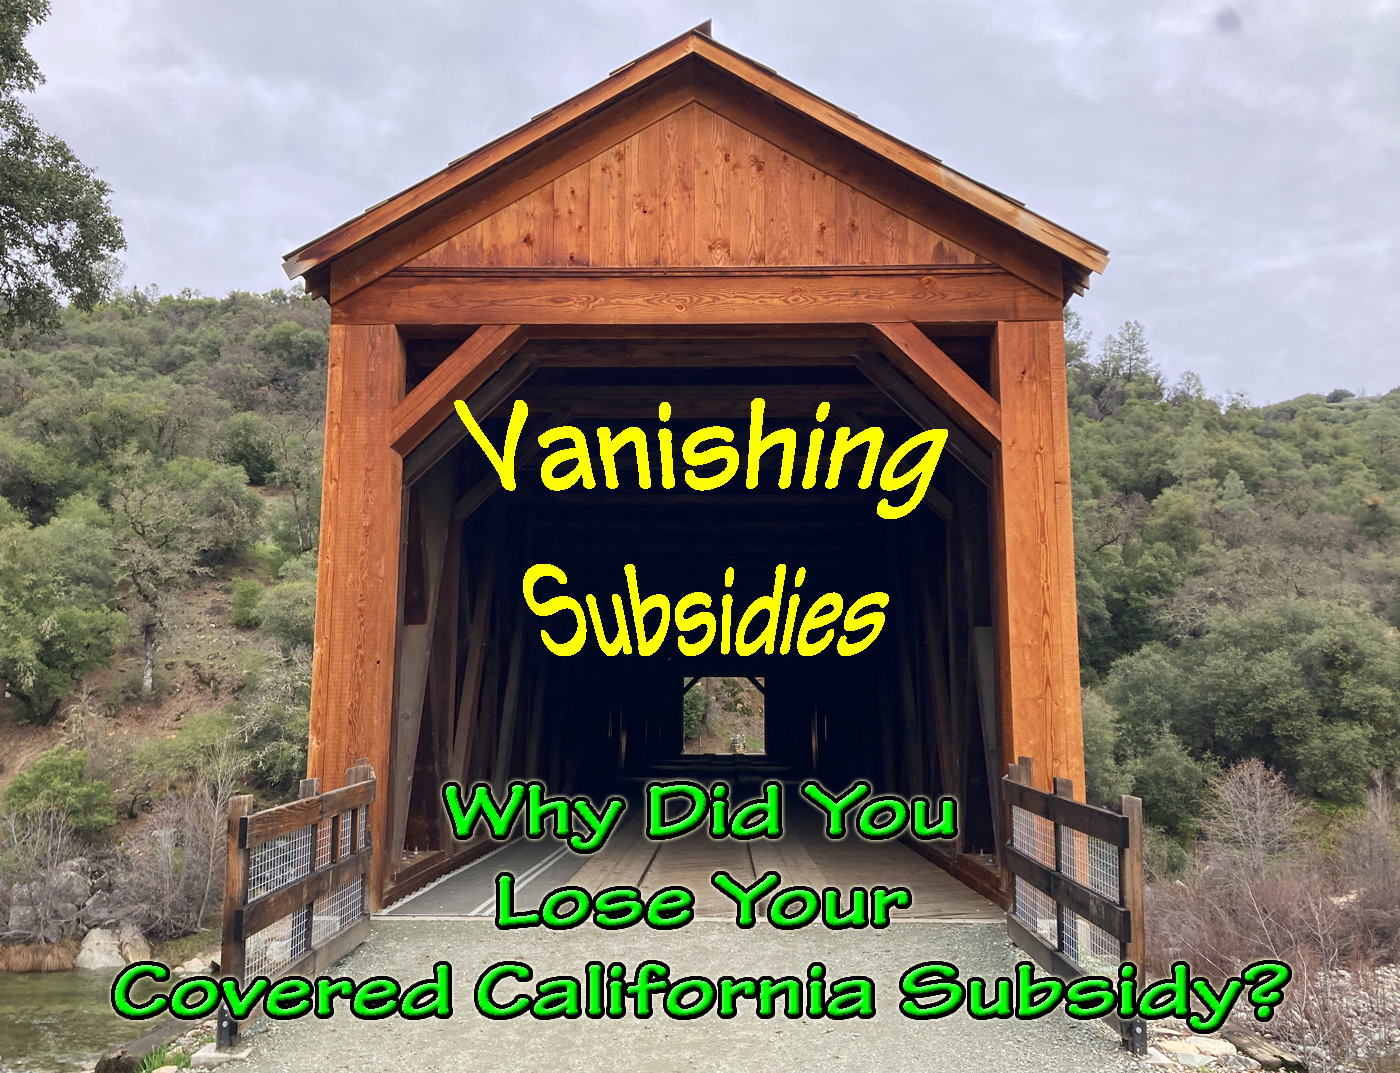 Reason why you lost your Covered California subsidies.